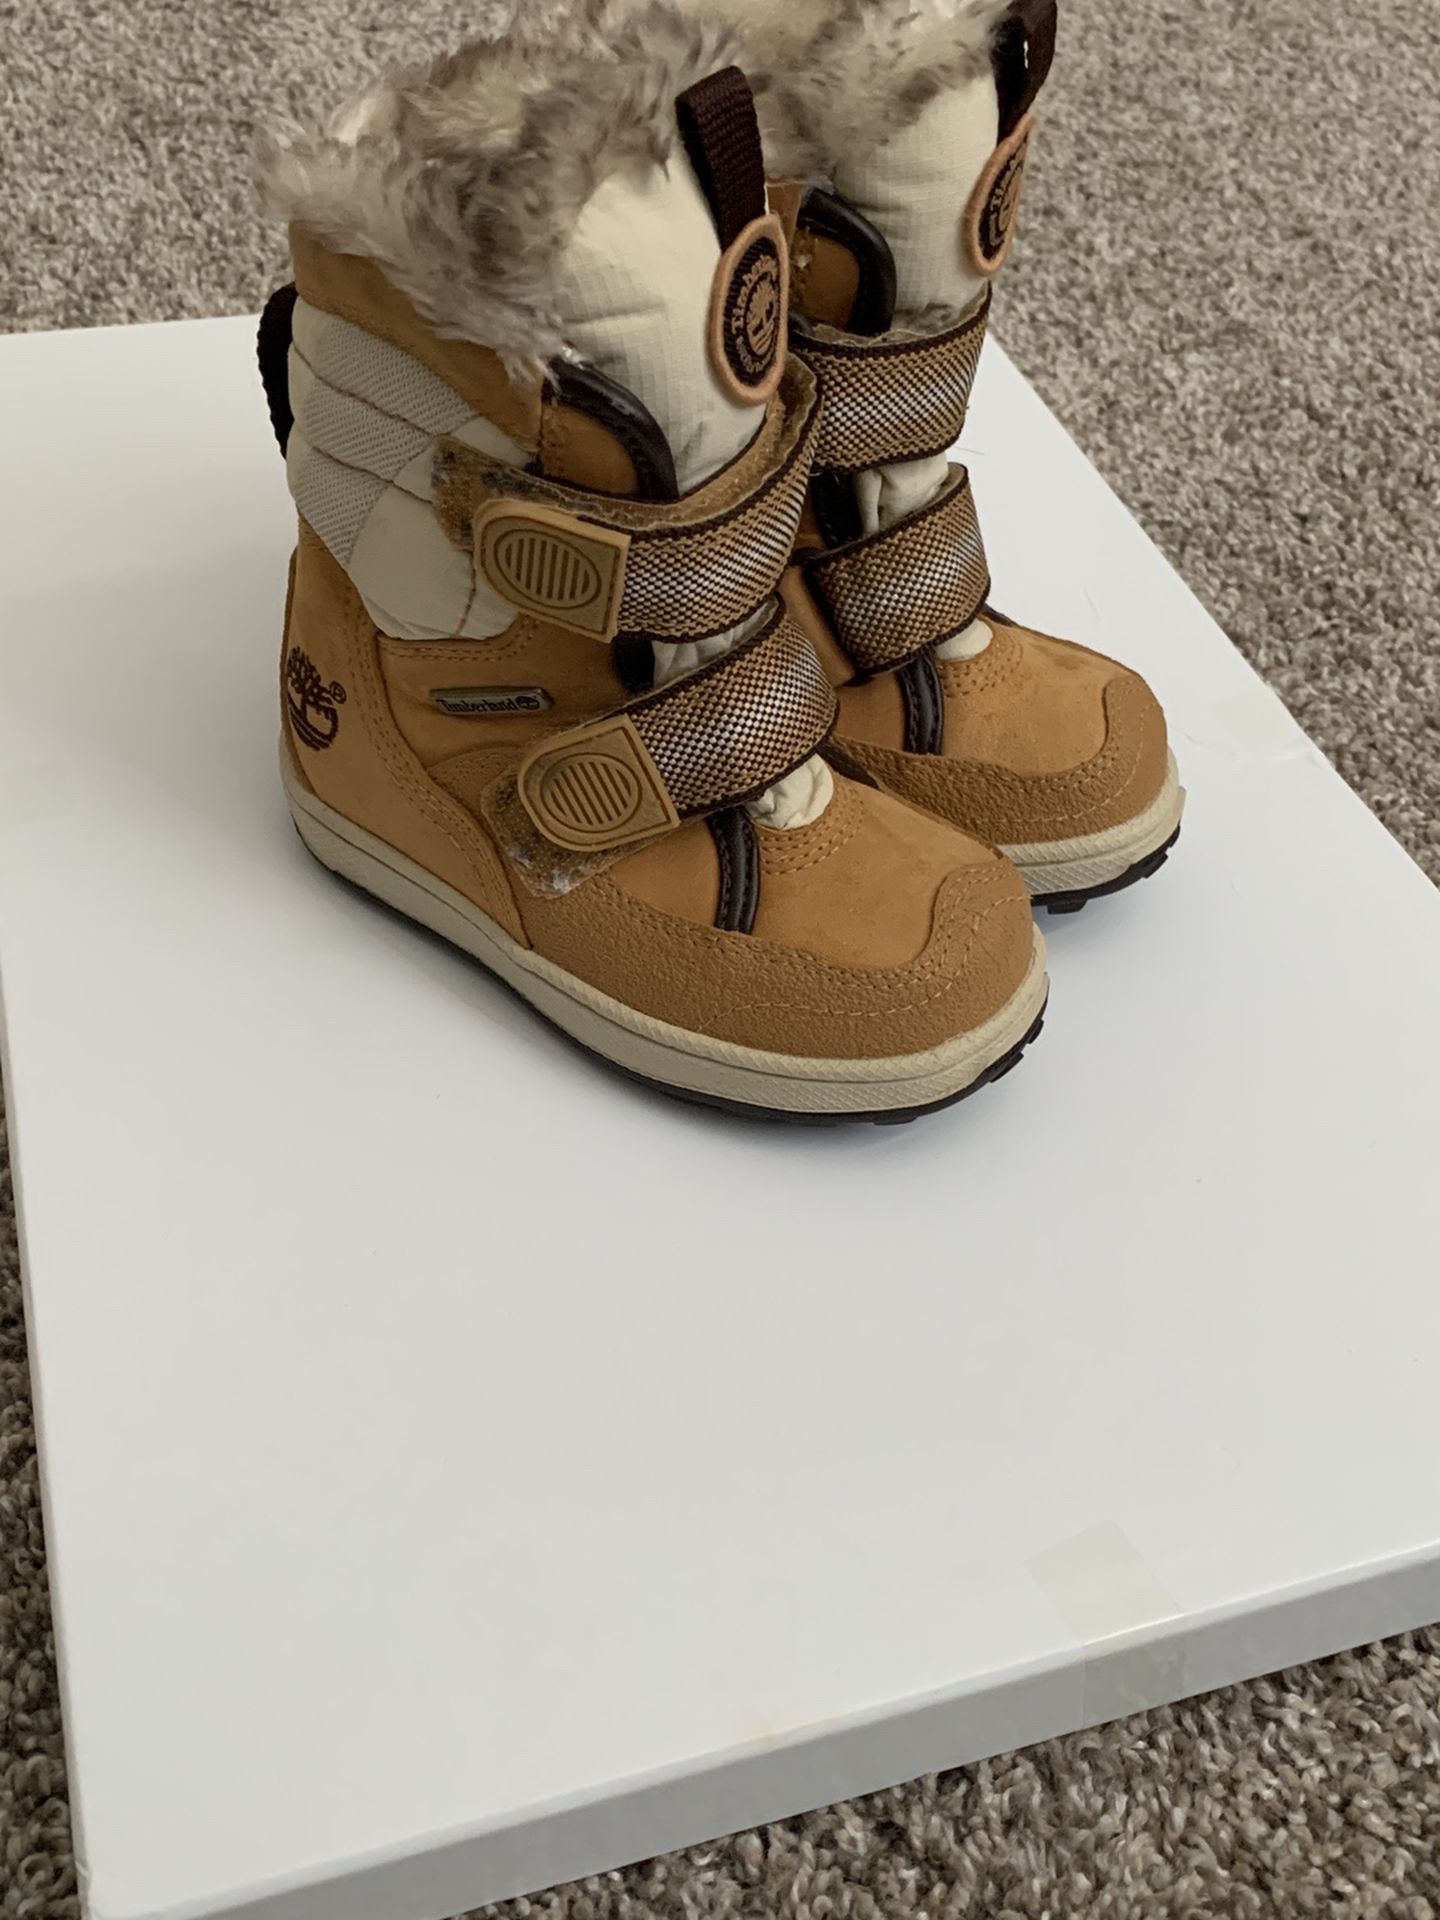 Timberland Toddler Winter Boots